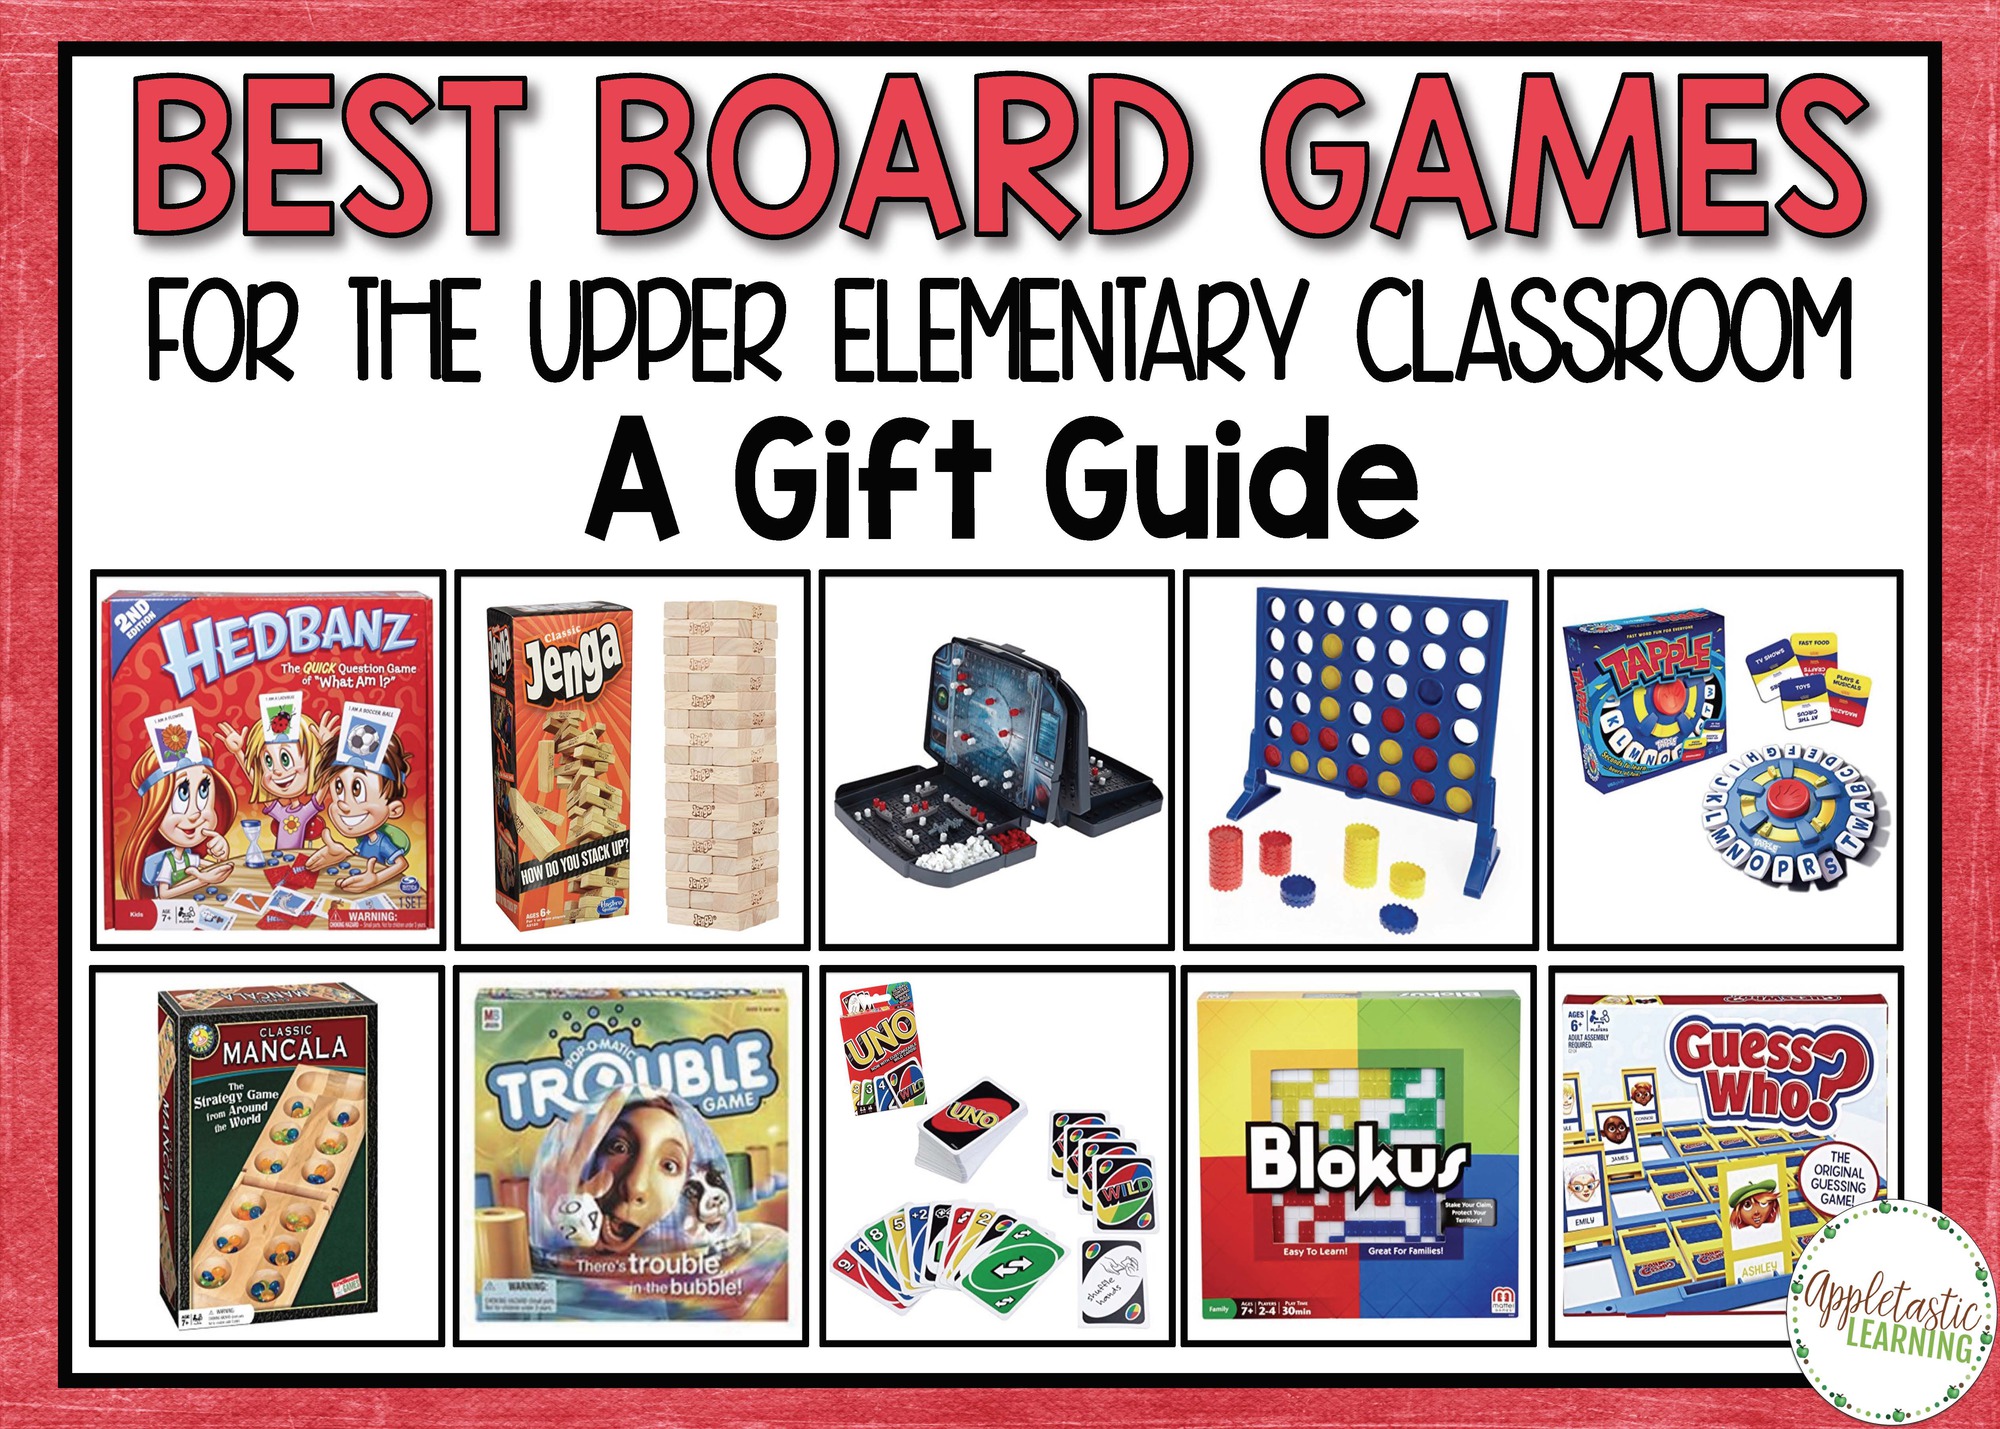 10-best-board-games-for-the-upper-elementary-classroom-appletastic